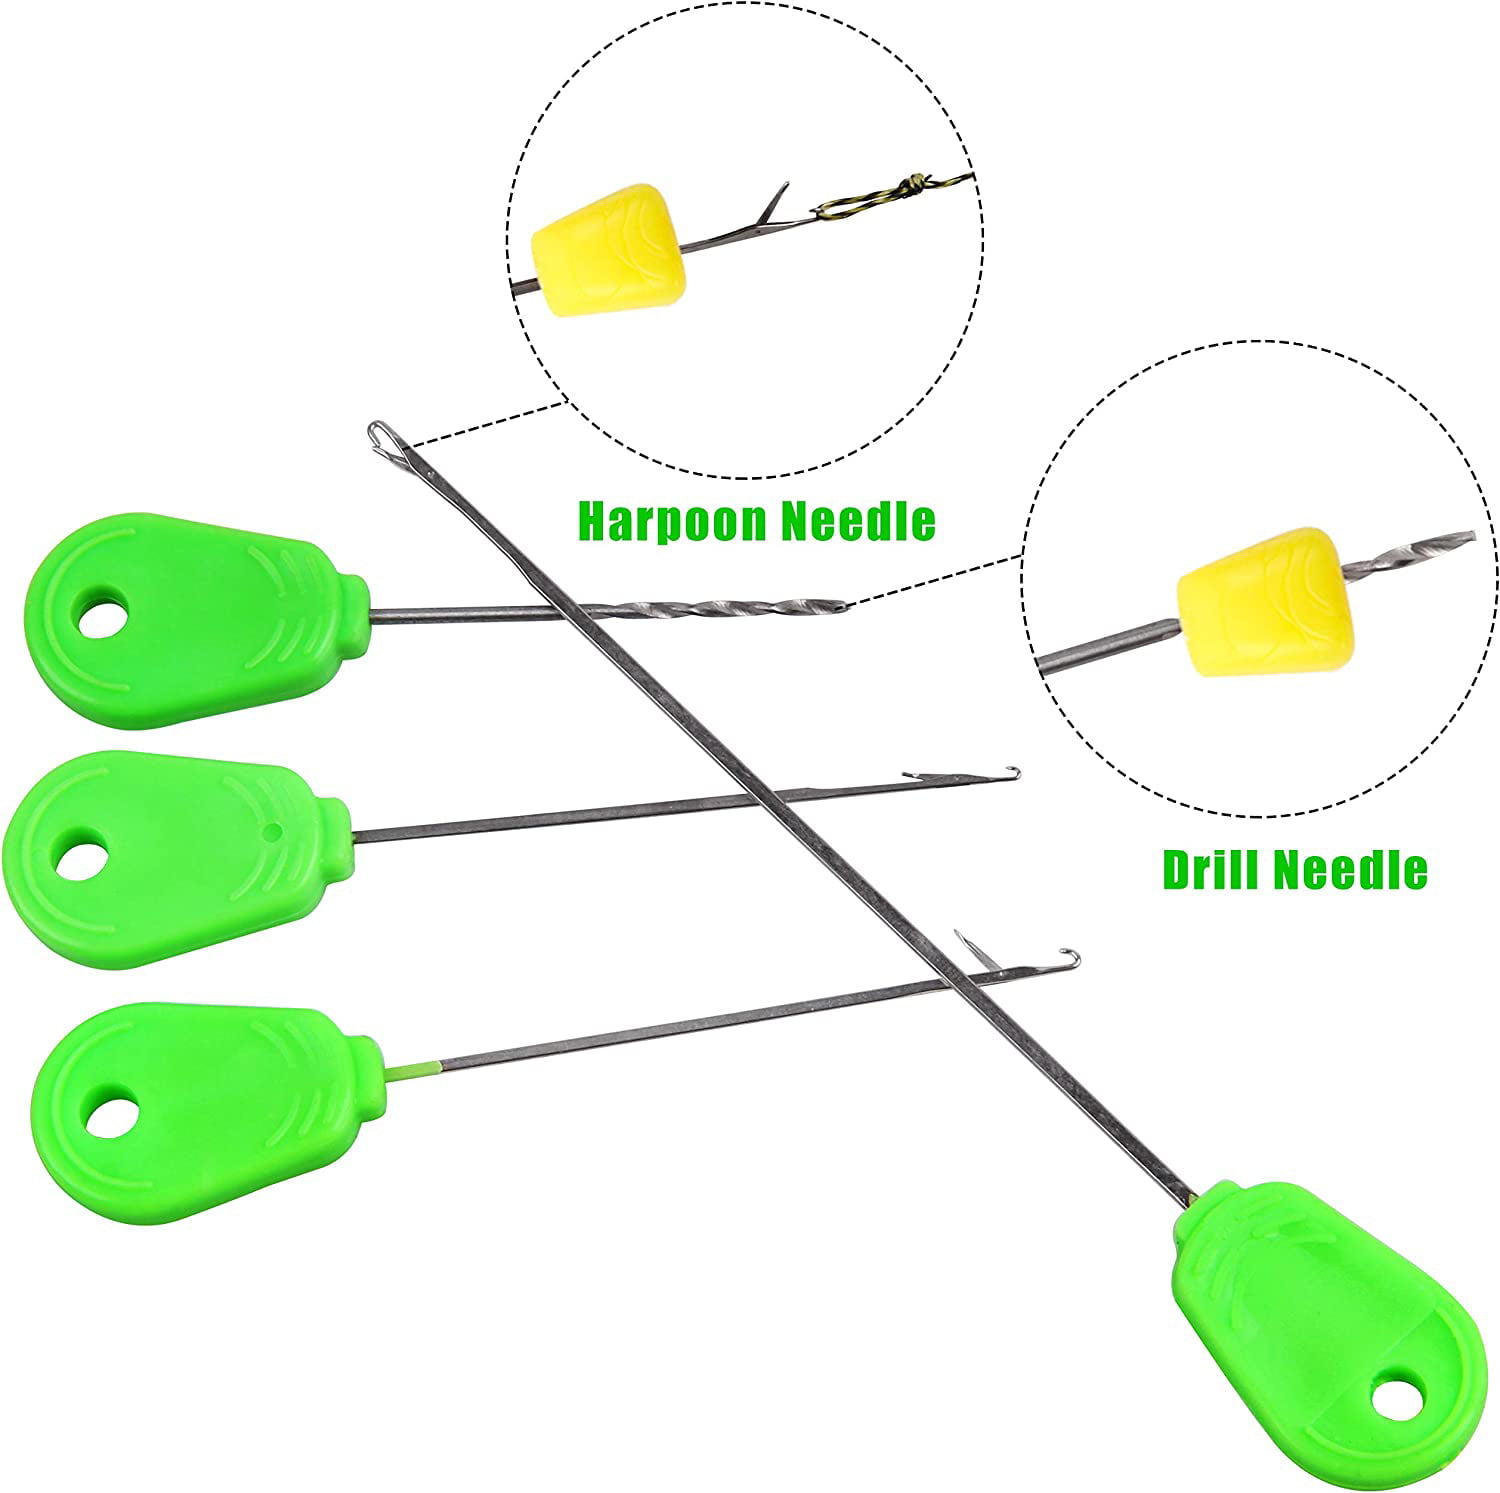 OROOTL Carp Fishing Hair Rigs 45pcs Curved Barbed Carp Hook Braided Line  Bait Stopper Needle Tool Scent Corn 